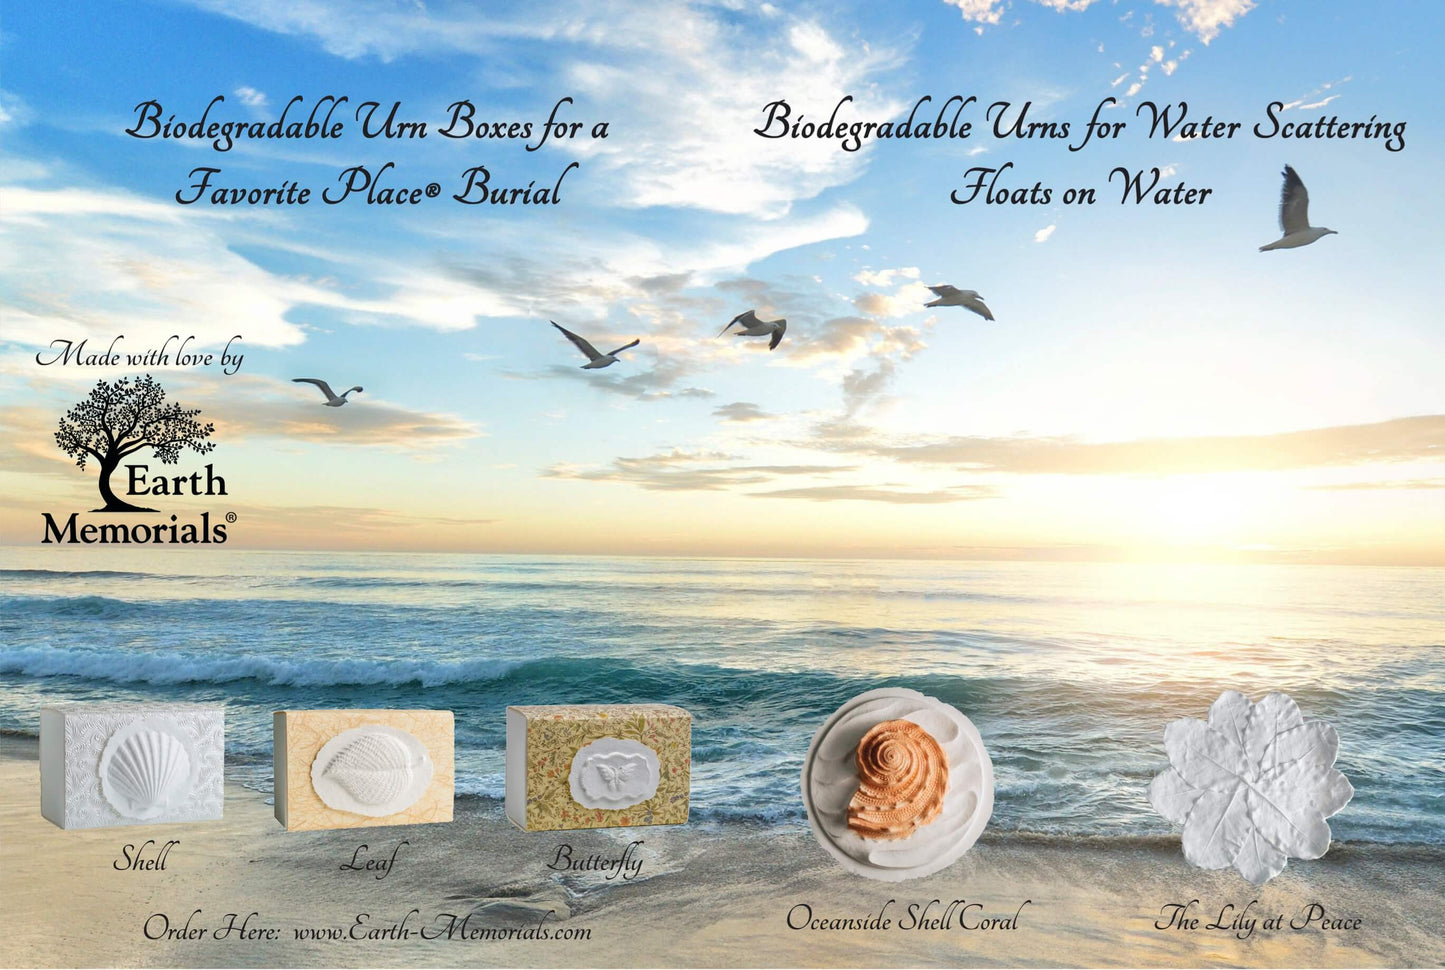 Rose Small - The FAVORITE PLACE® Small Burial Biodegradable Urn for Human Ashes, Ocean or Earth Burial Cremation Urn